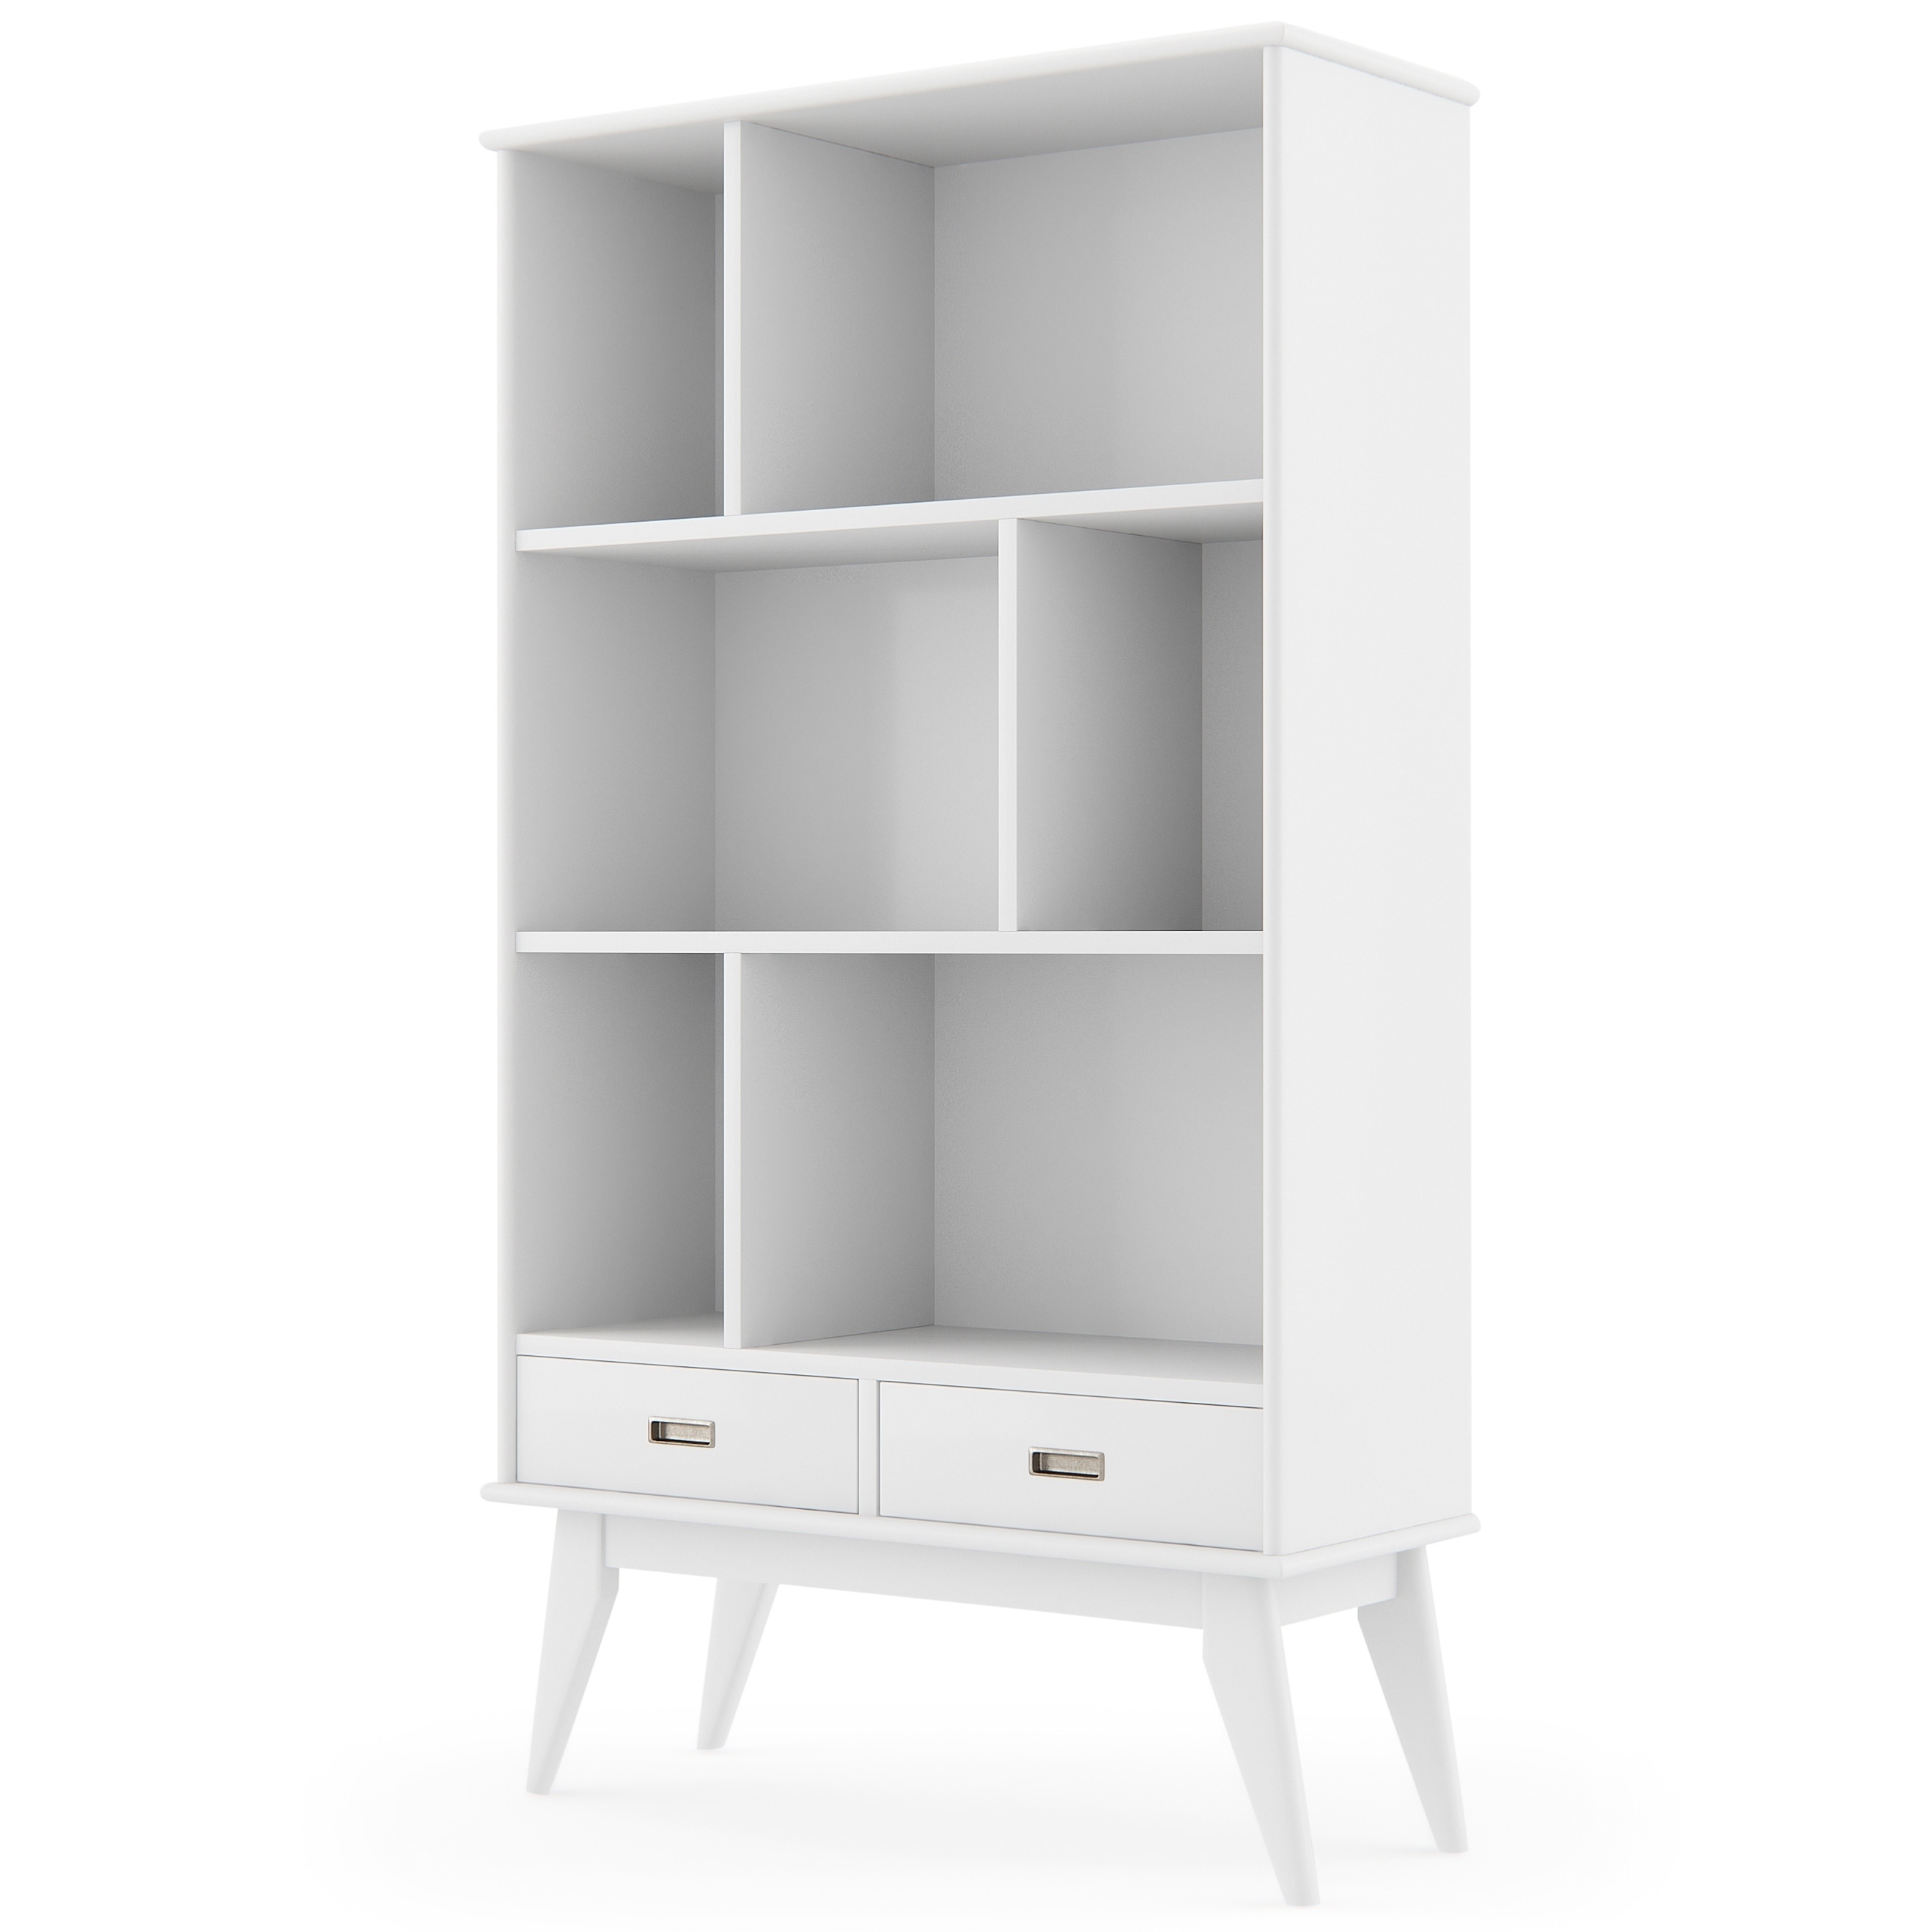 WyndenHall  Tierney SOLID HARDWOOD 64 inch x 35 inch Mid Century Modern Wide Bookcase and Storage Unit - 35"w x 14"d x 64" h White Painted - image 1 of 5